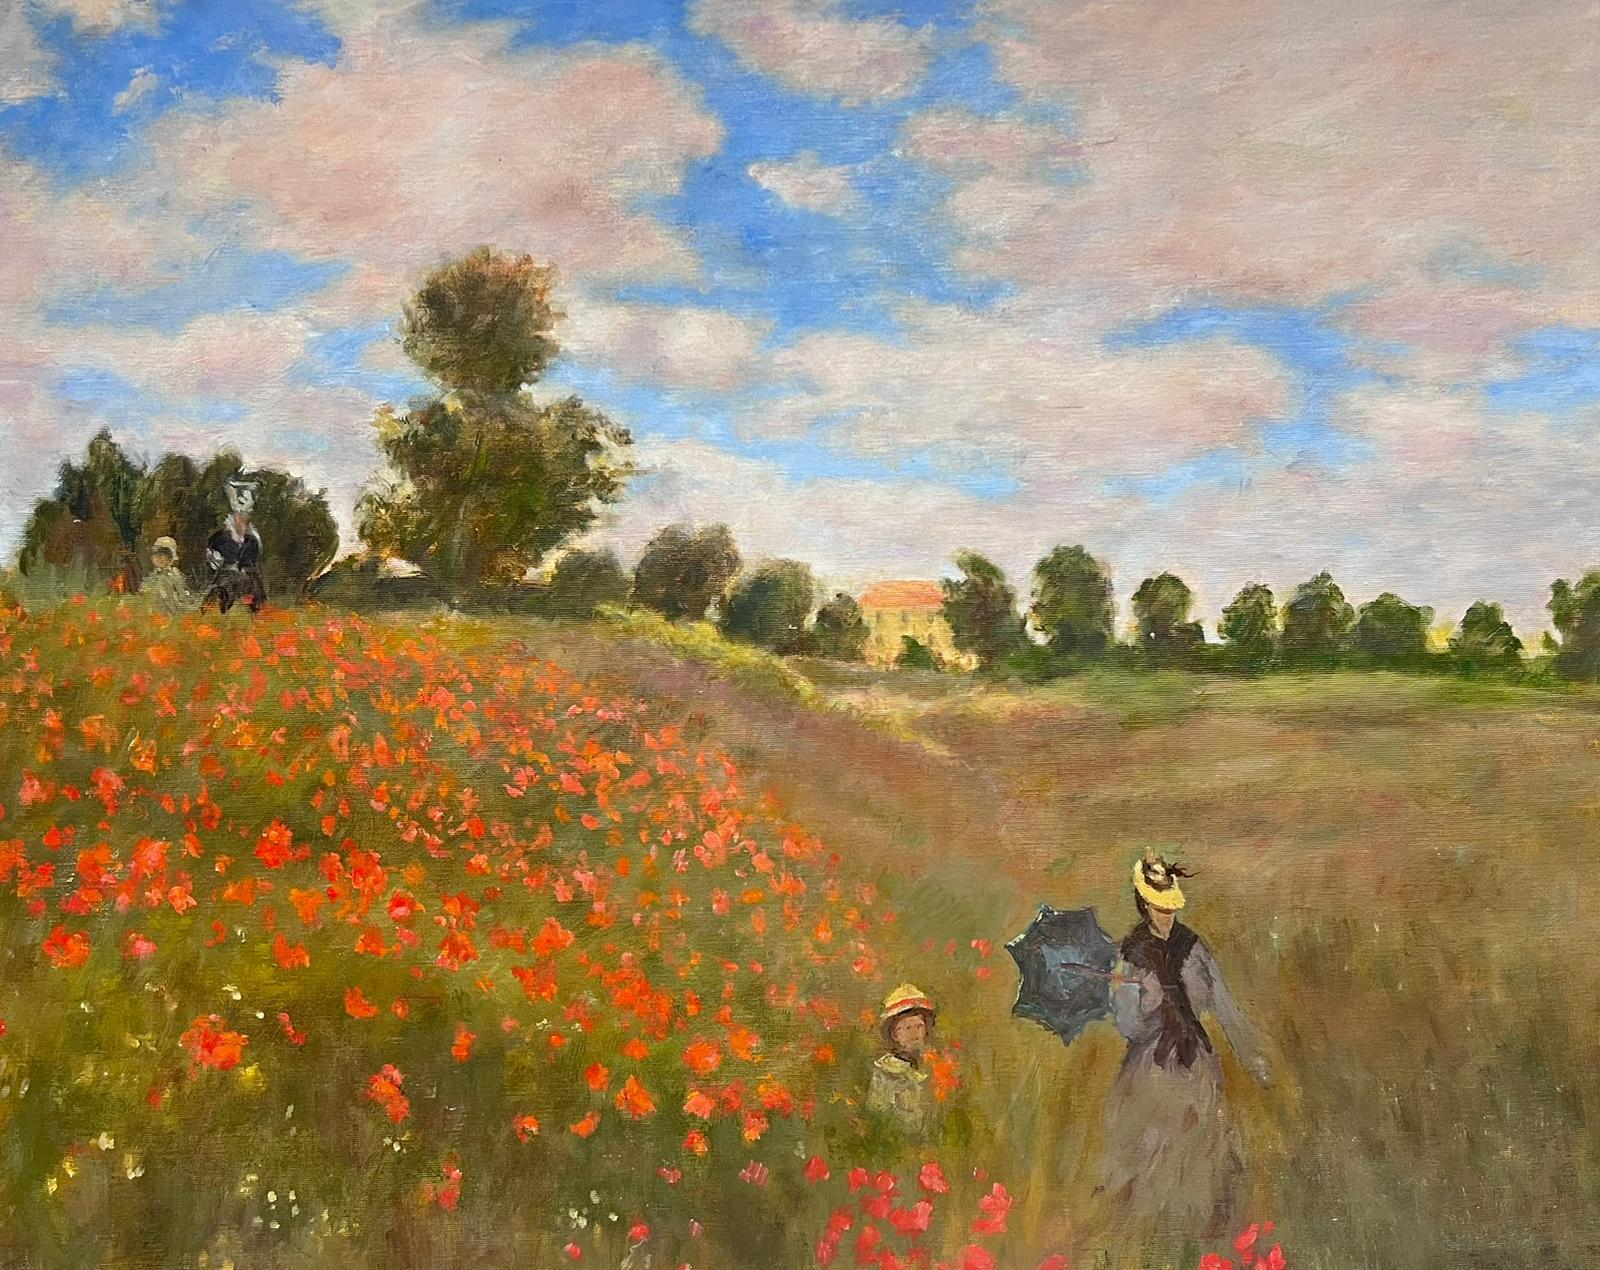 after CLAUDE MONET Landscape Painting - Family Walking through Poppy Field under Parasols Large French Impressionist Oil